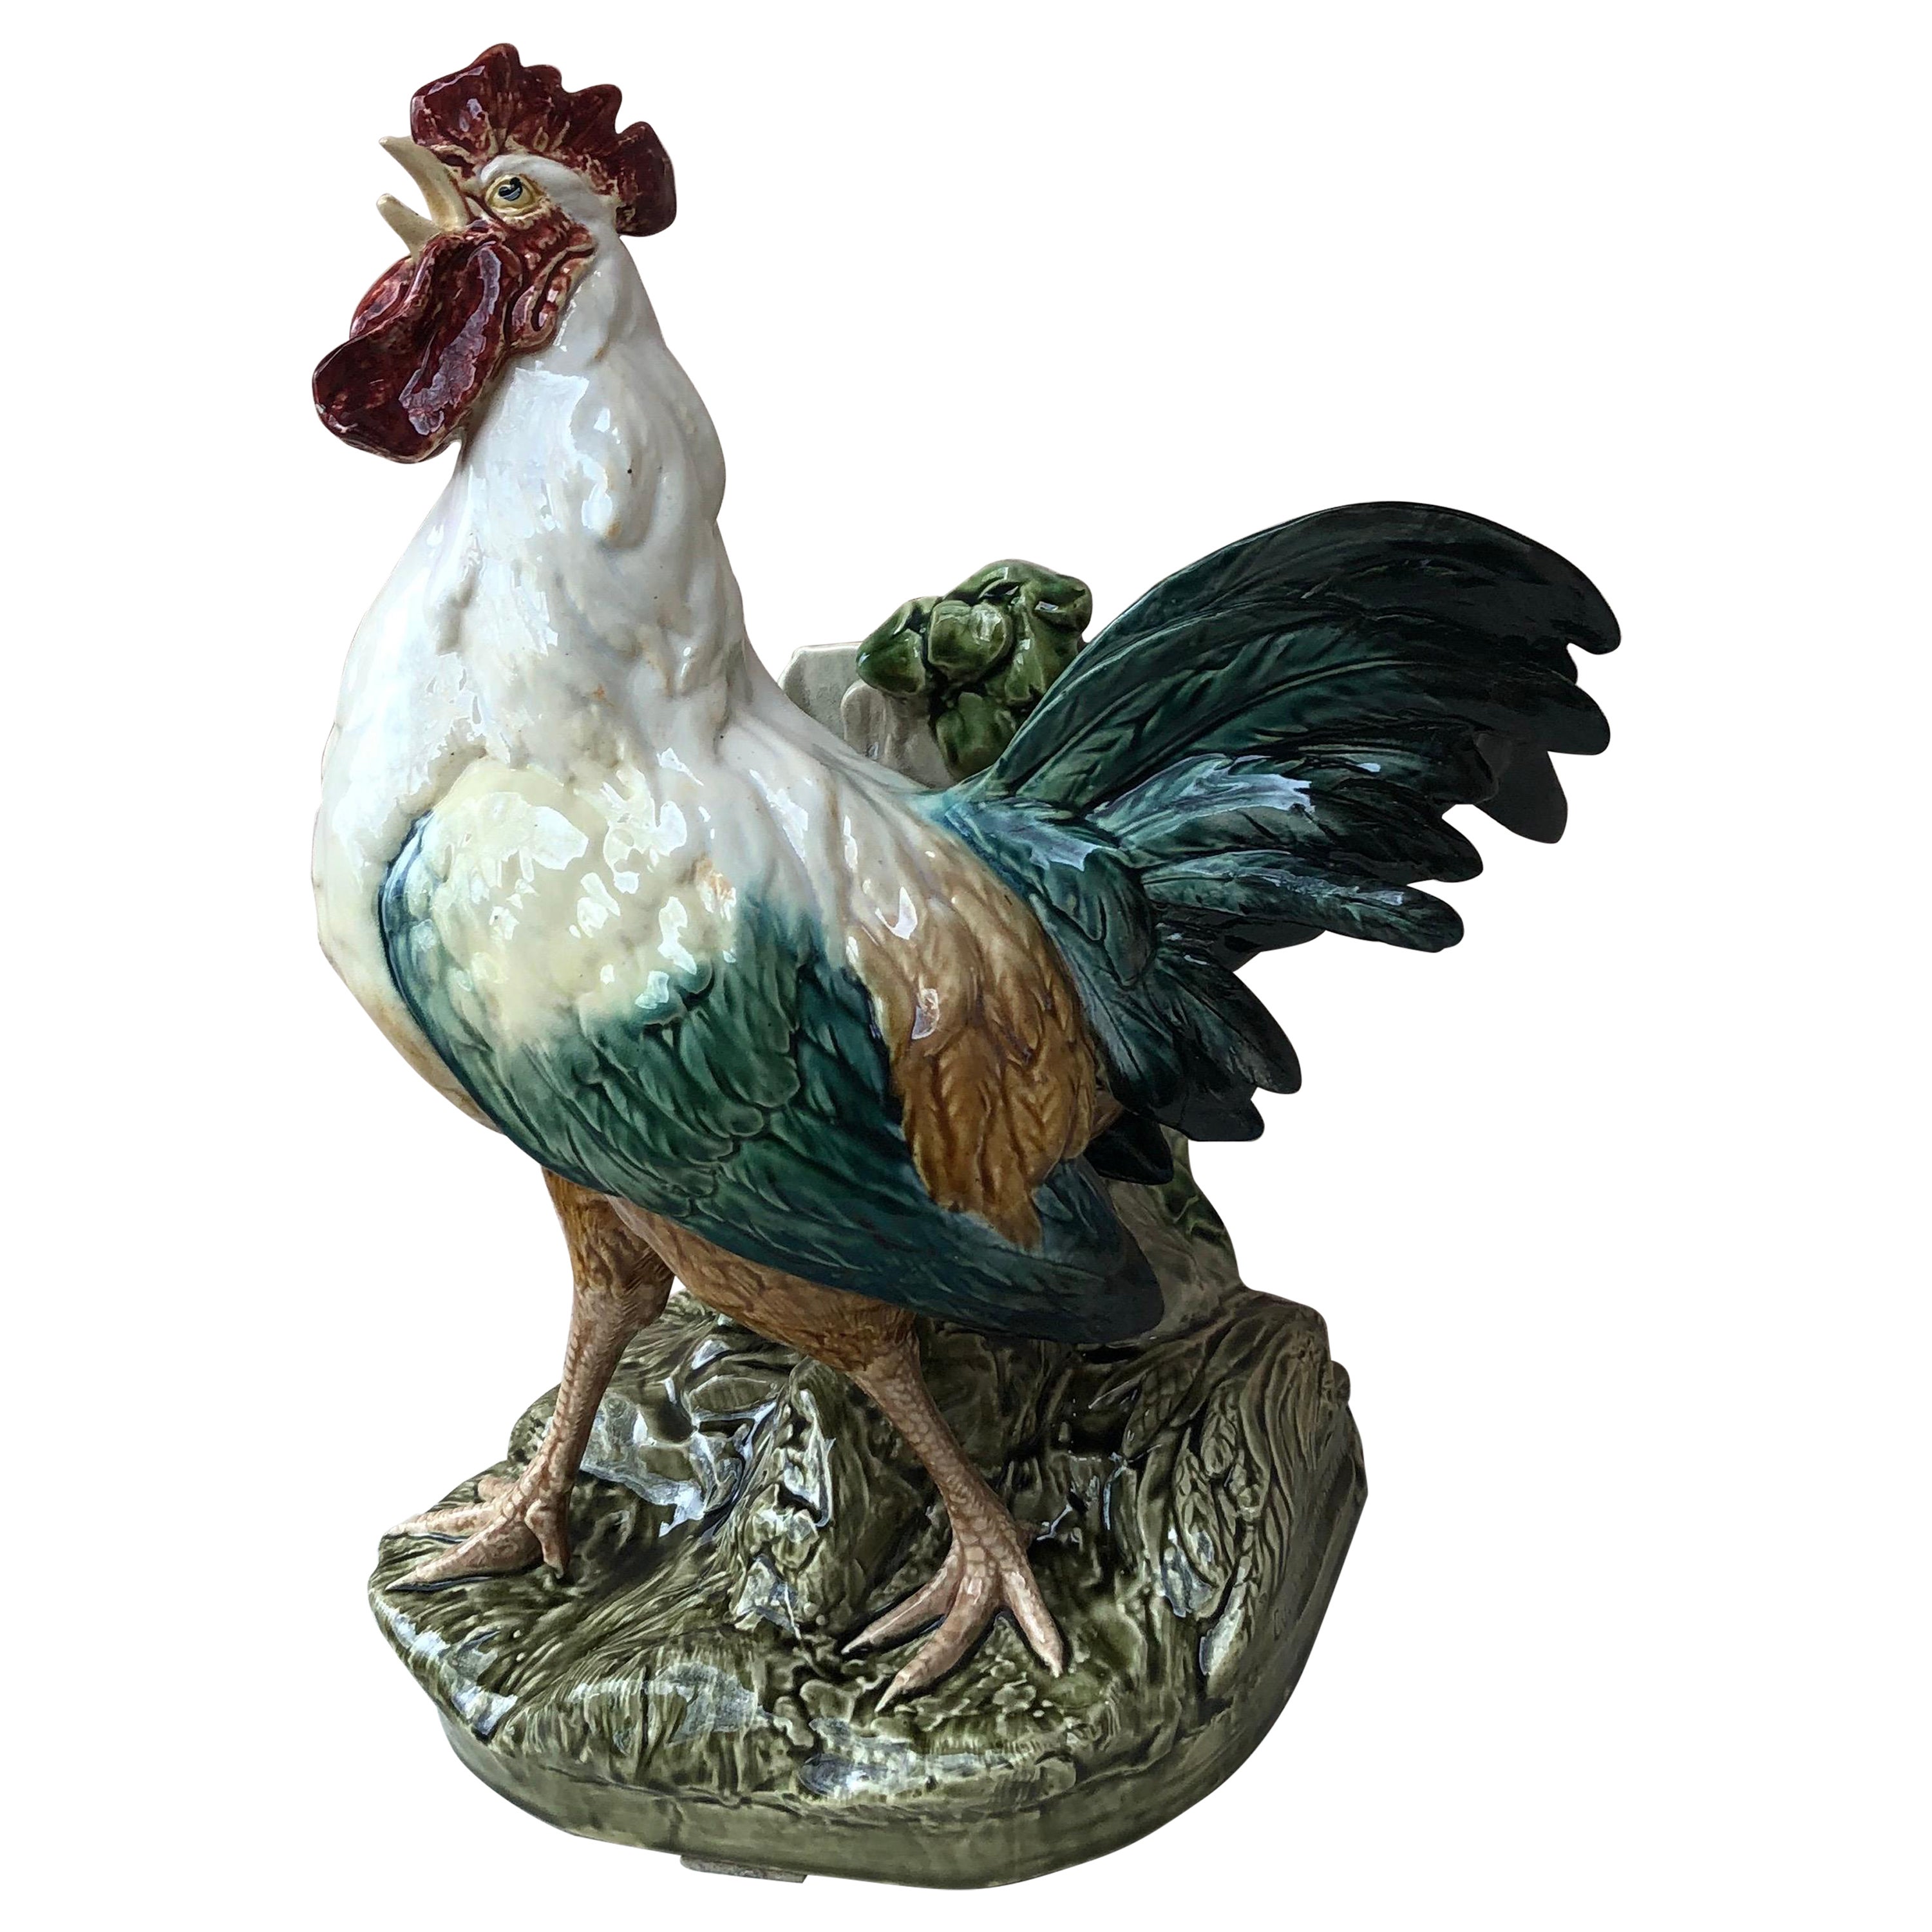 C.1890 Majolica Rooster Vase Choisy Le Roi by Carrier Belleuse